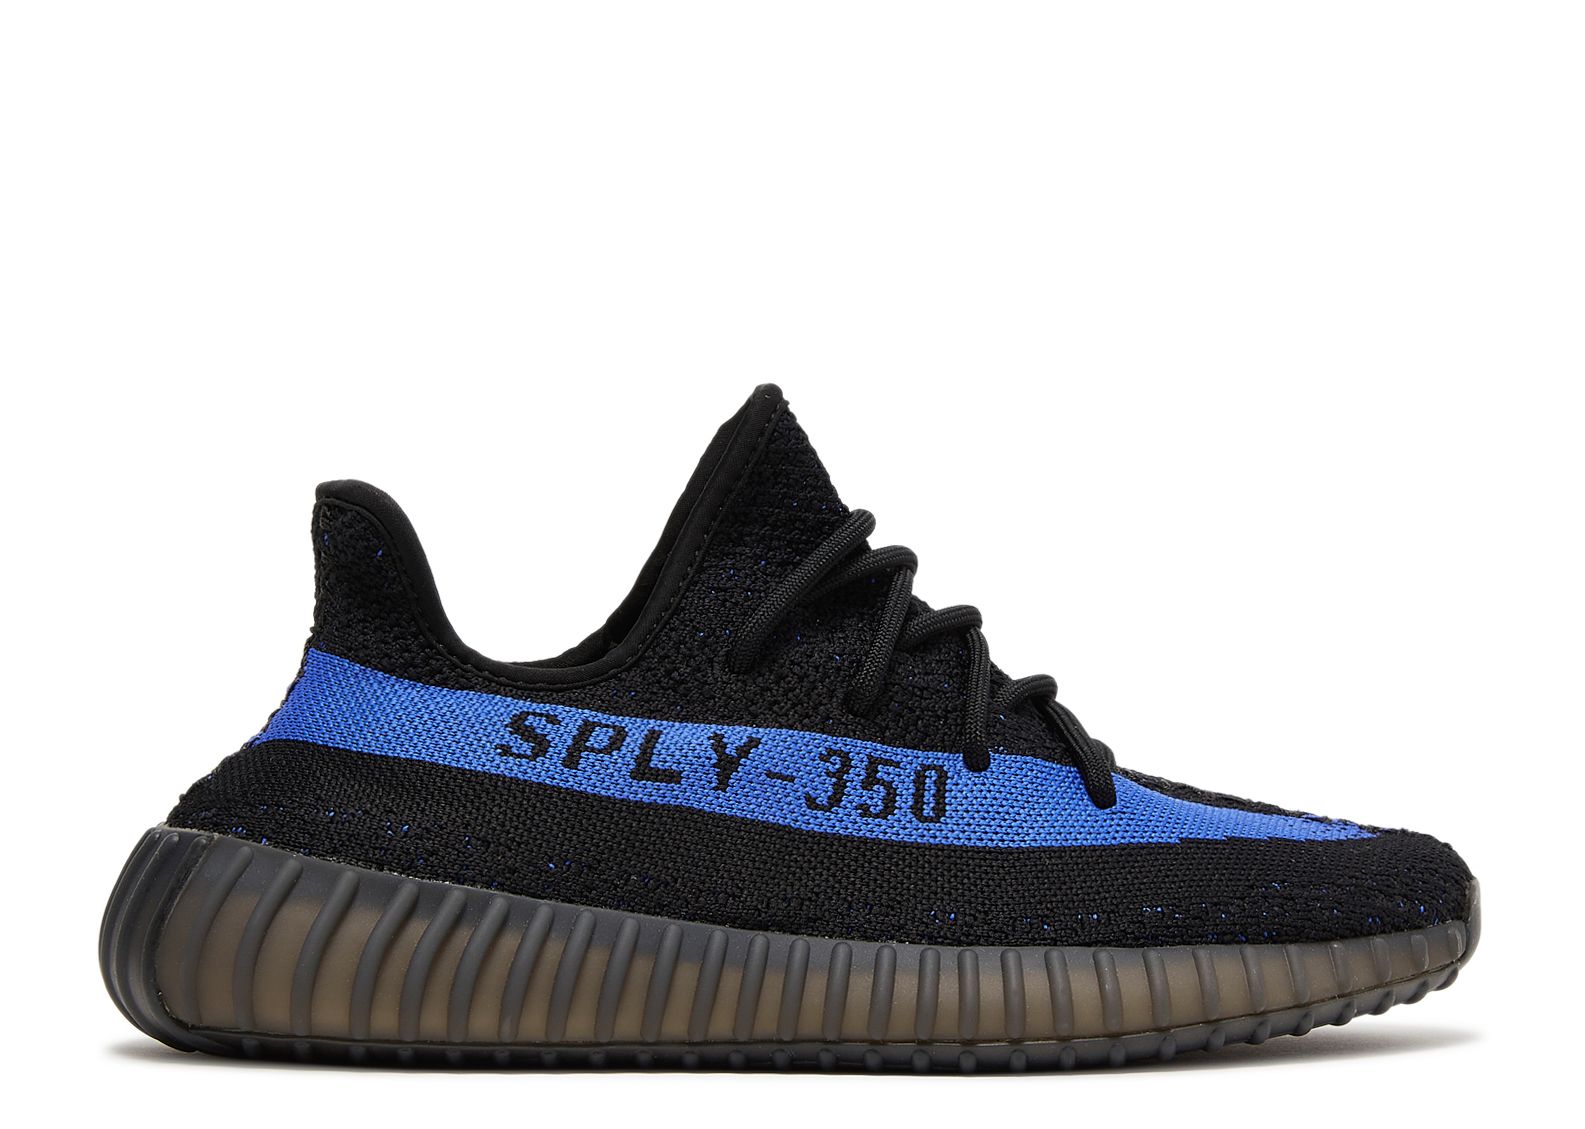 Yeezy Boost 350 V2 'Dazzling Blue' - Adidas GY7164 - core black/dazzling blue/core black | Club